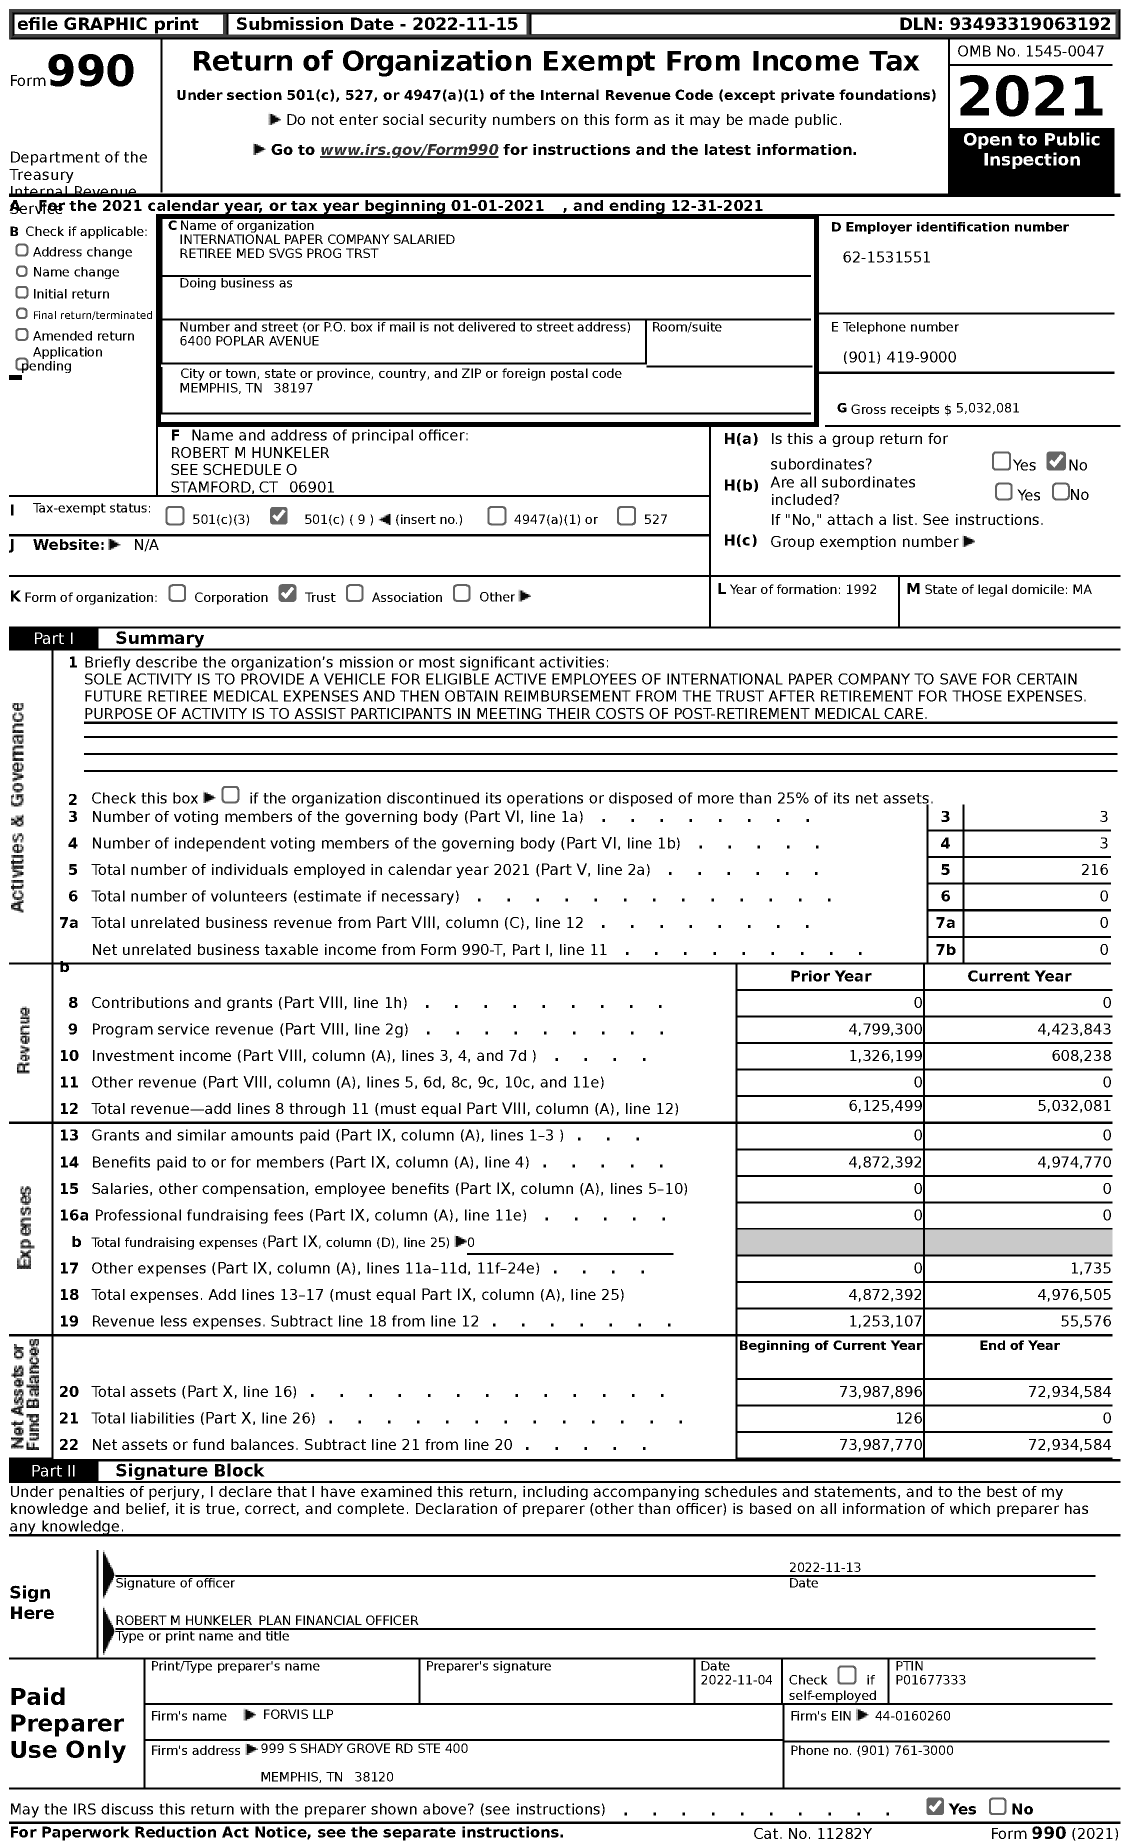 Image of first page of 2021 Form 990 for International Paper Company Salaried Retiree Med SVGS Prog TRST